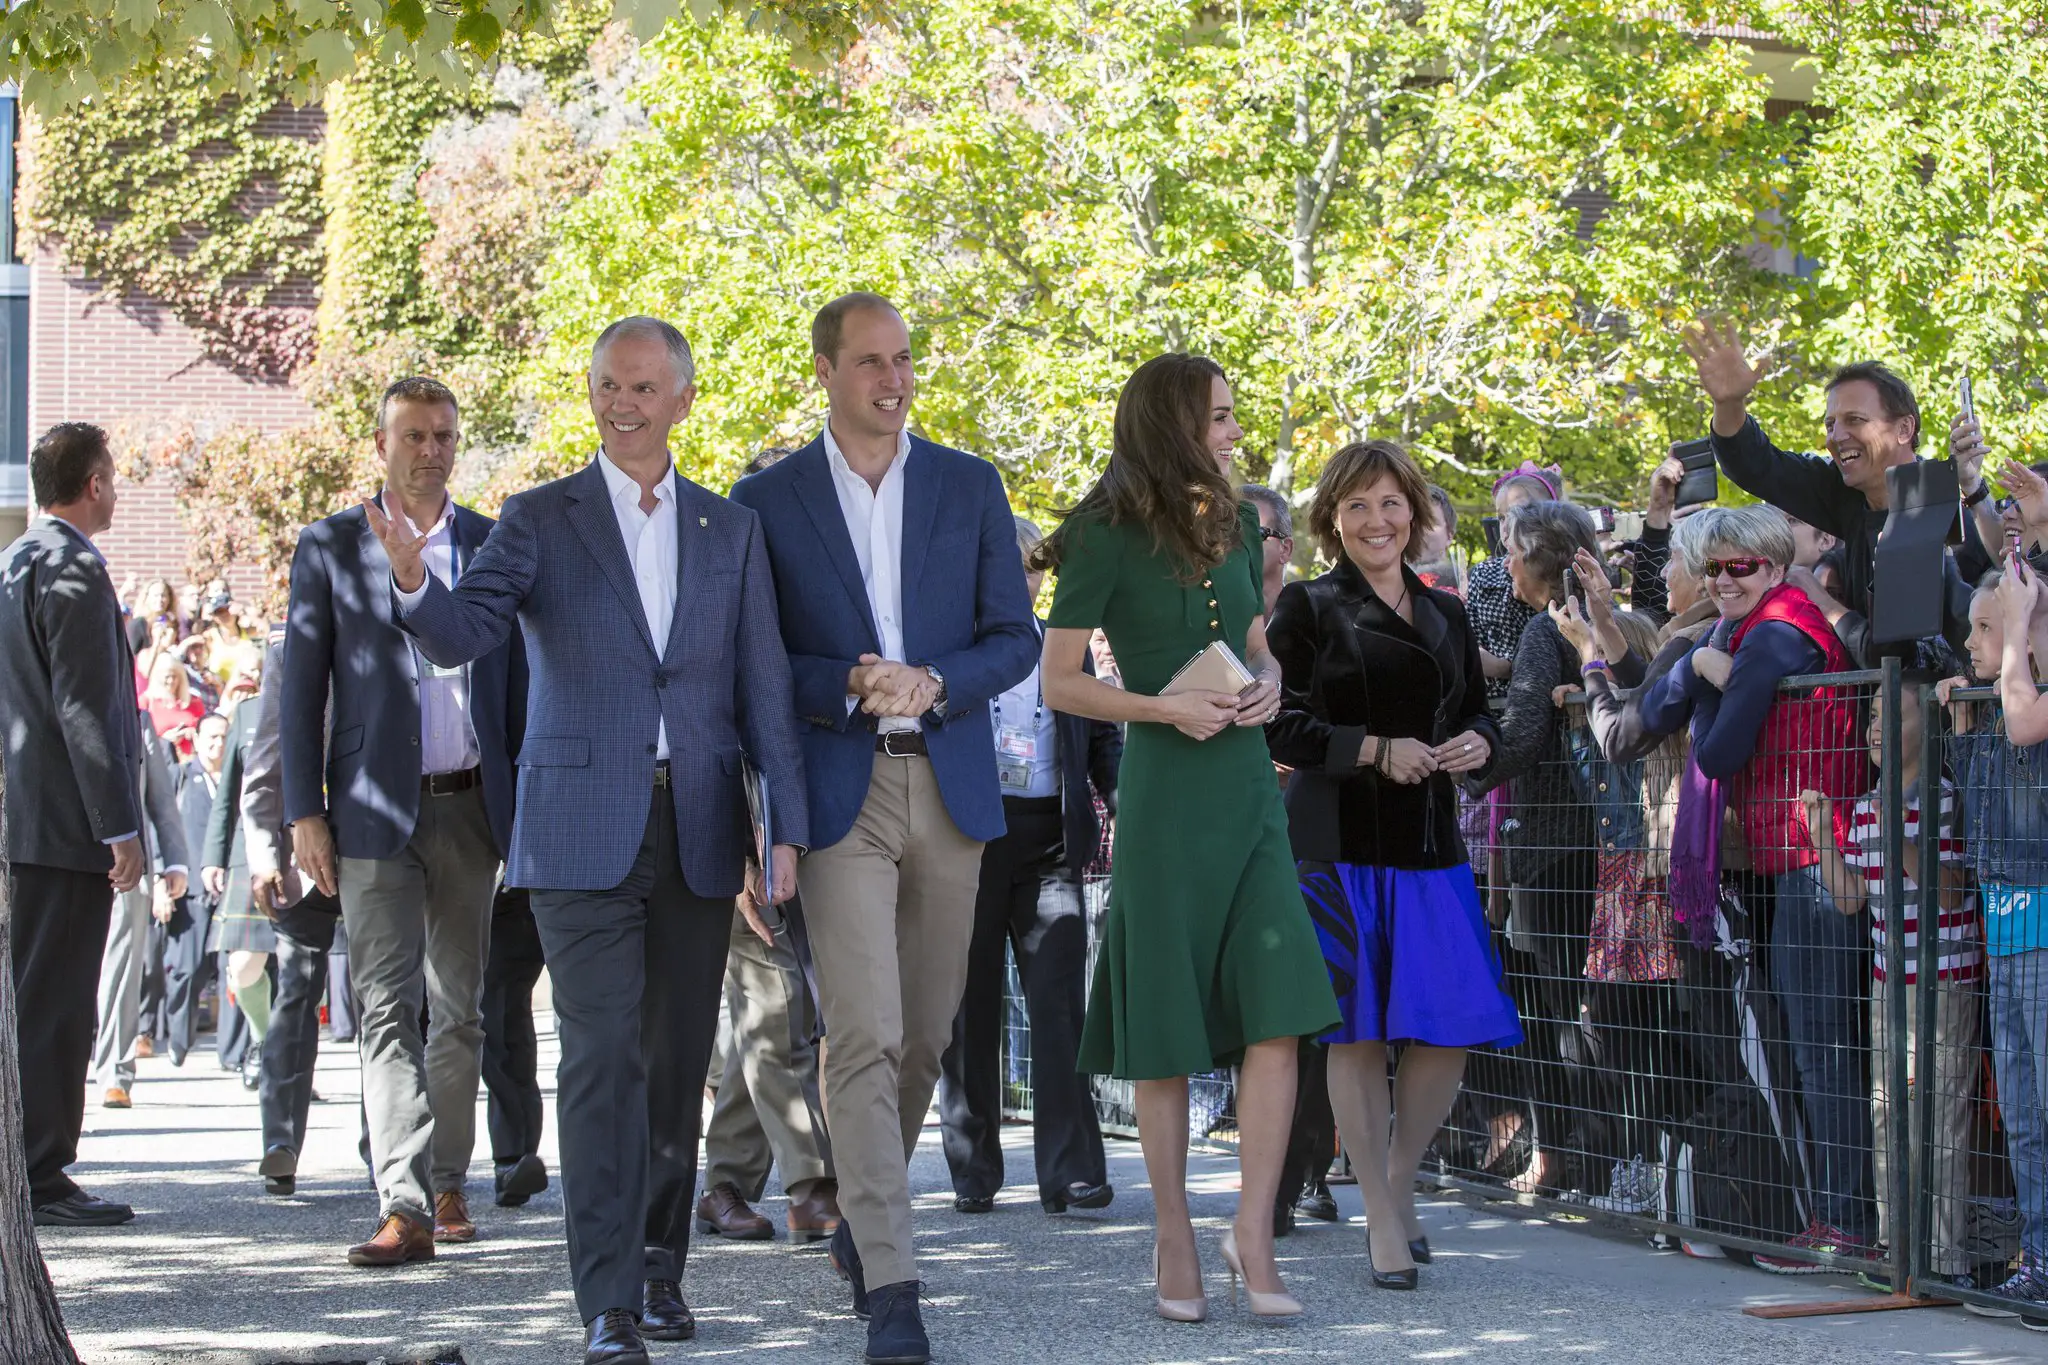 The Duke and Duchess of cambrdige received a warm welcome in kelowna